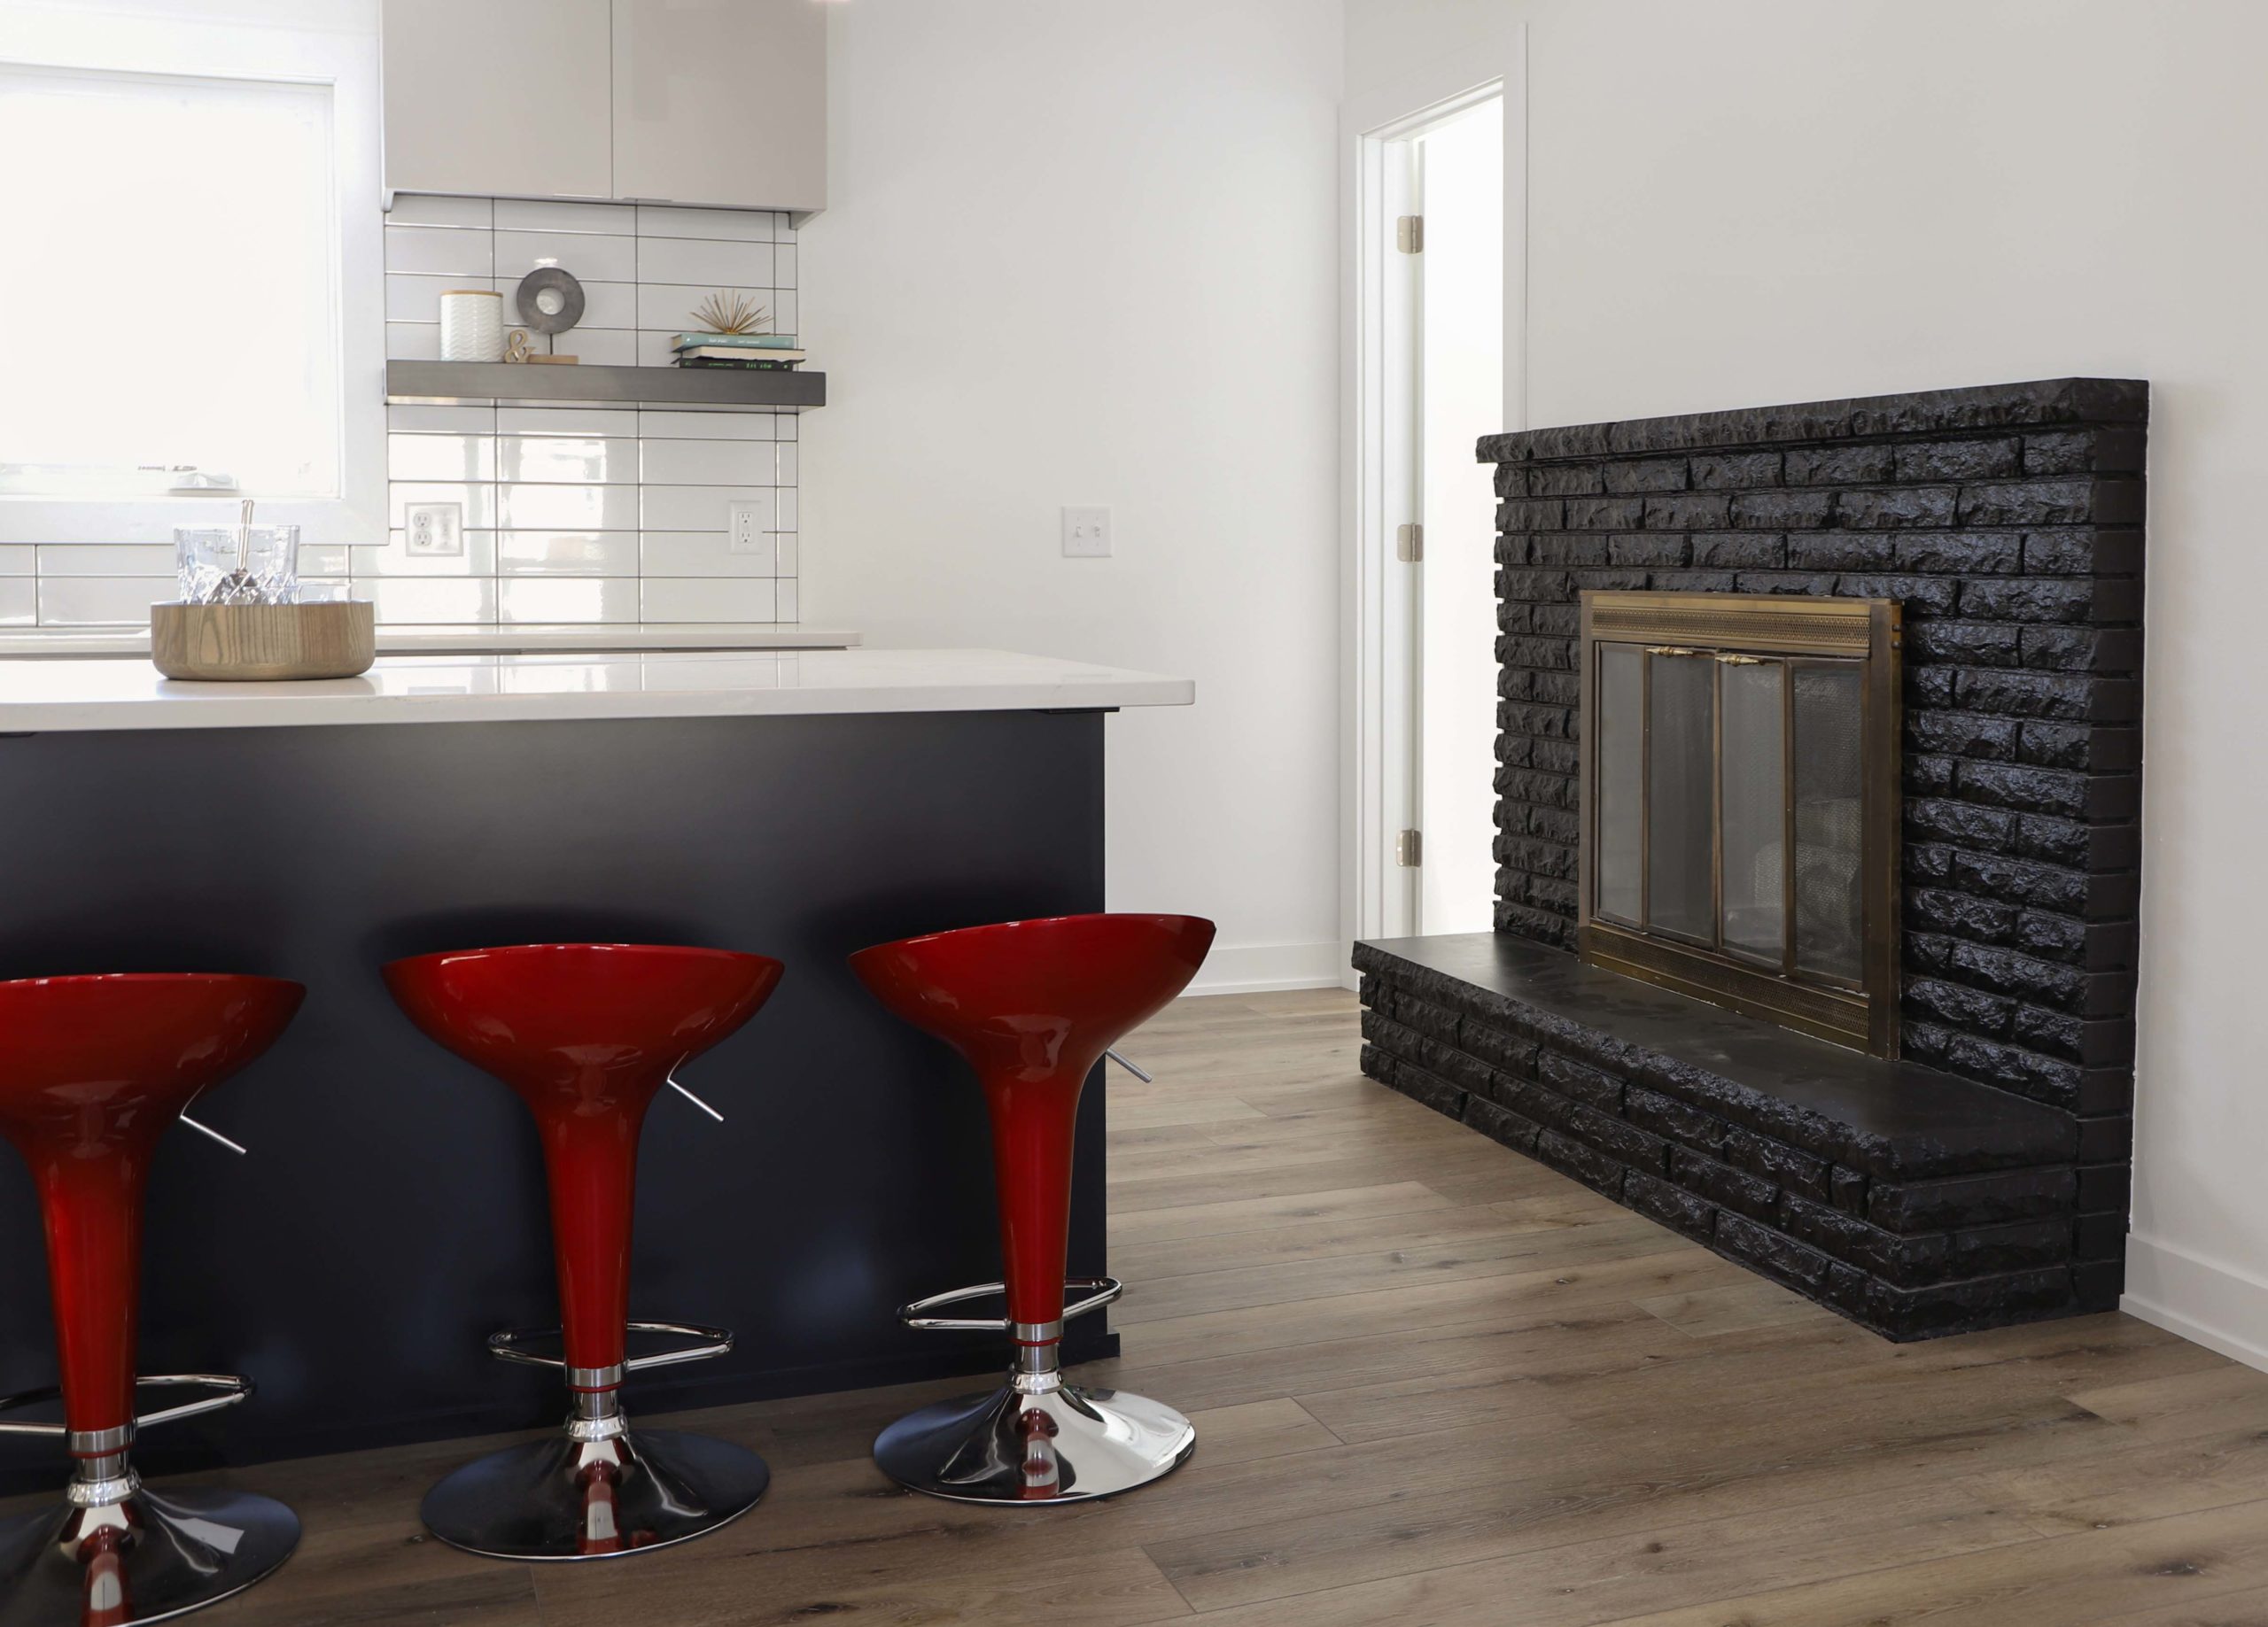 A kitchen with red stools and a fireplace.